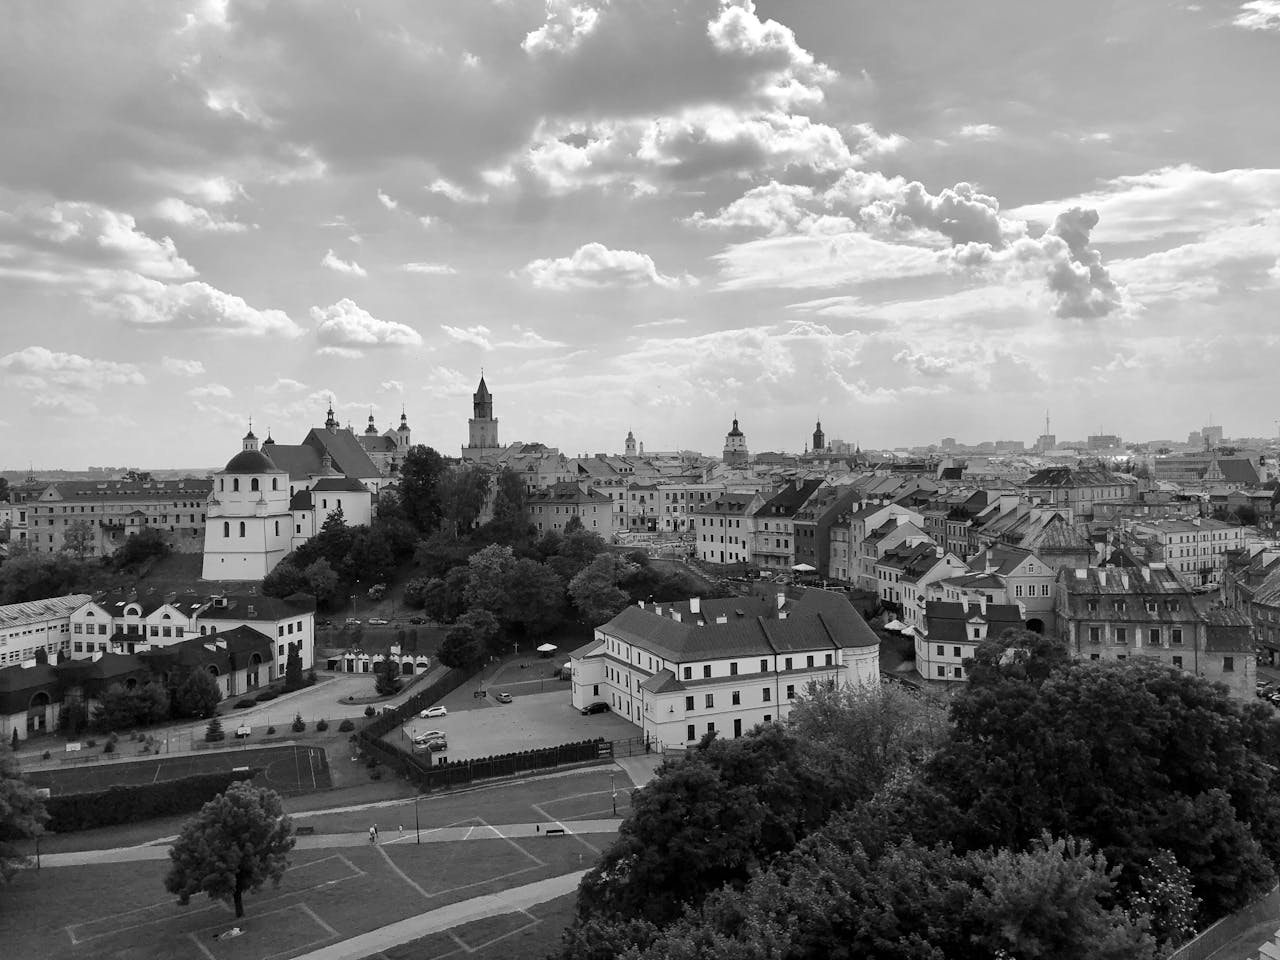 View of Old Town in Lublin, Poland